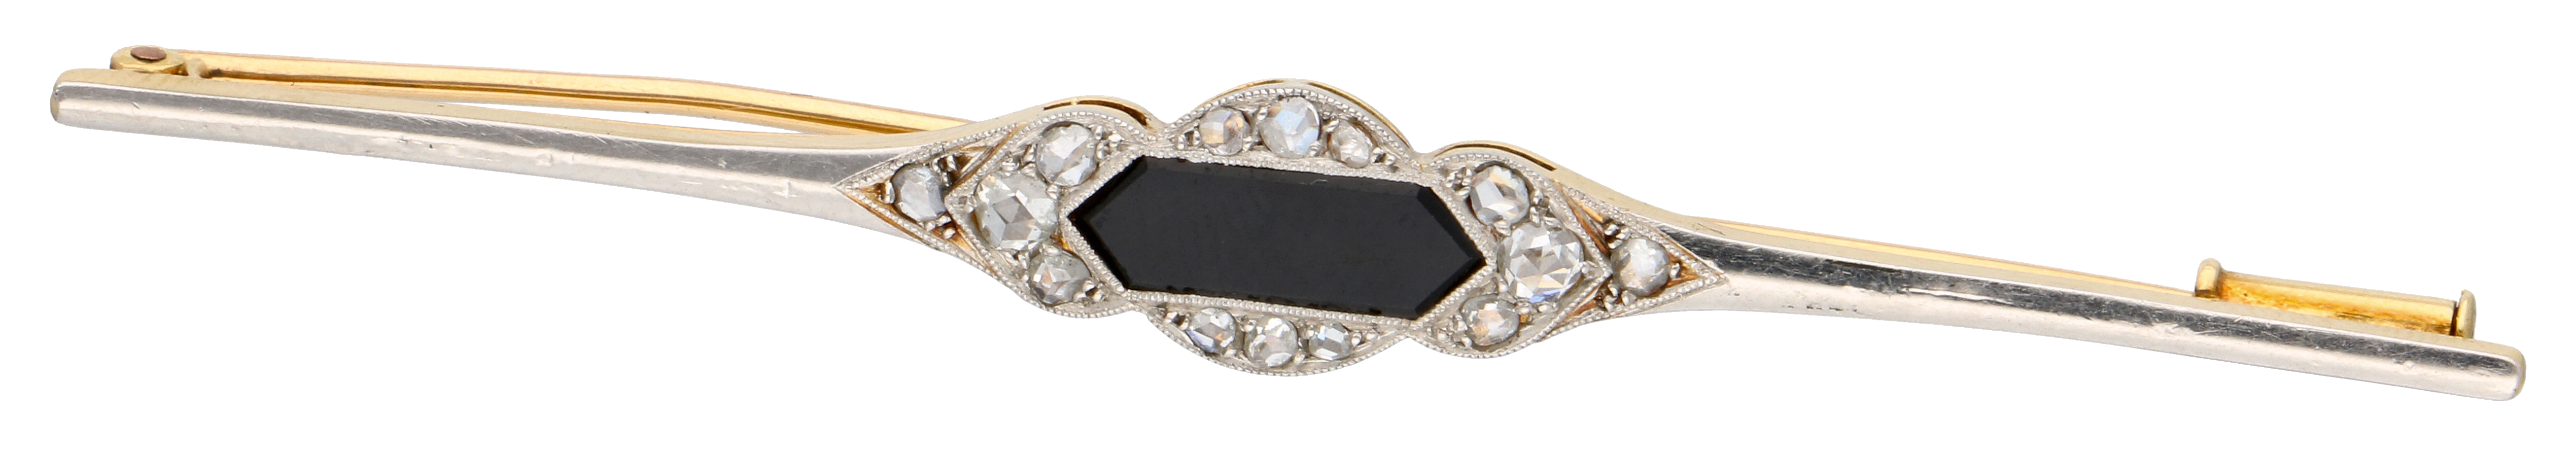 No Reserve - 14K Bicolor gold vintage brooch set with rose cut diamonds and onyx.